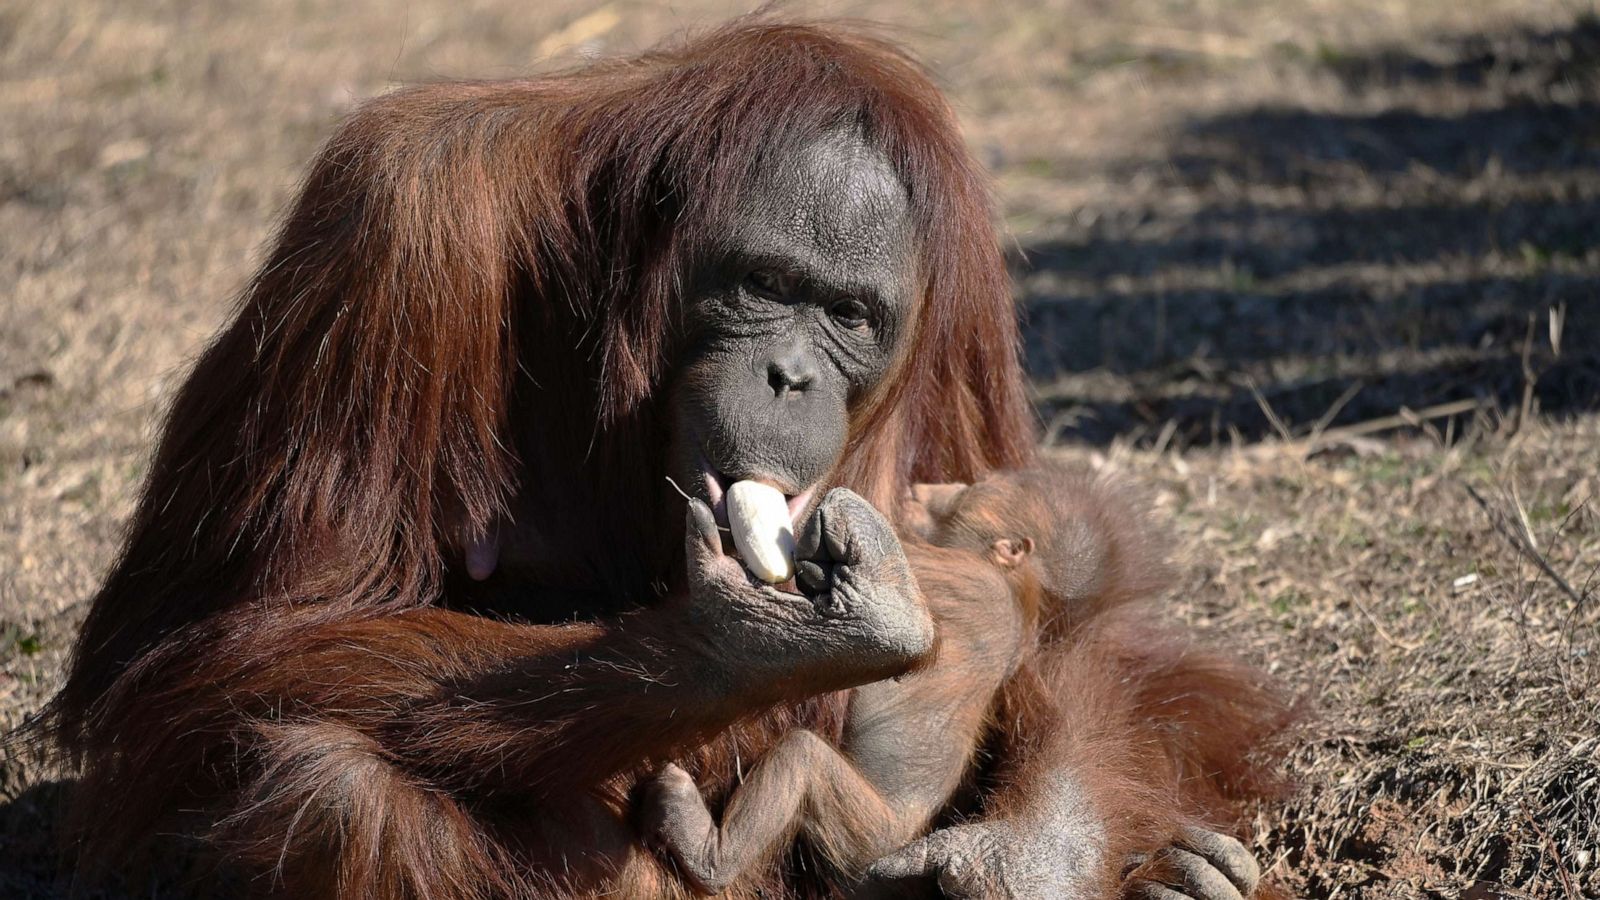 1600px x 900px - Orangutan learns to breastfeed by watching zookeeper breastfeed her infant  son - Good Morning America